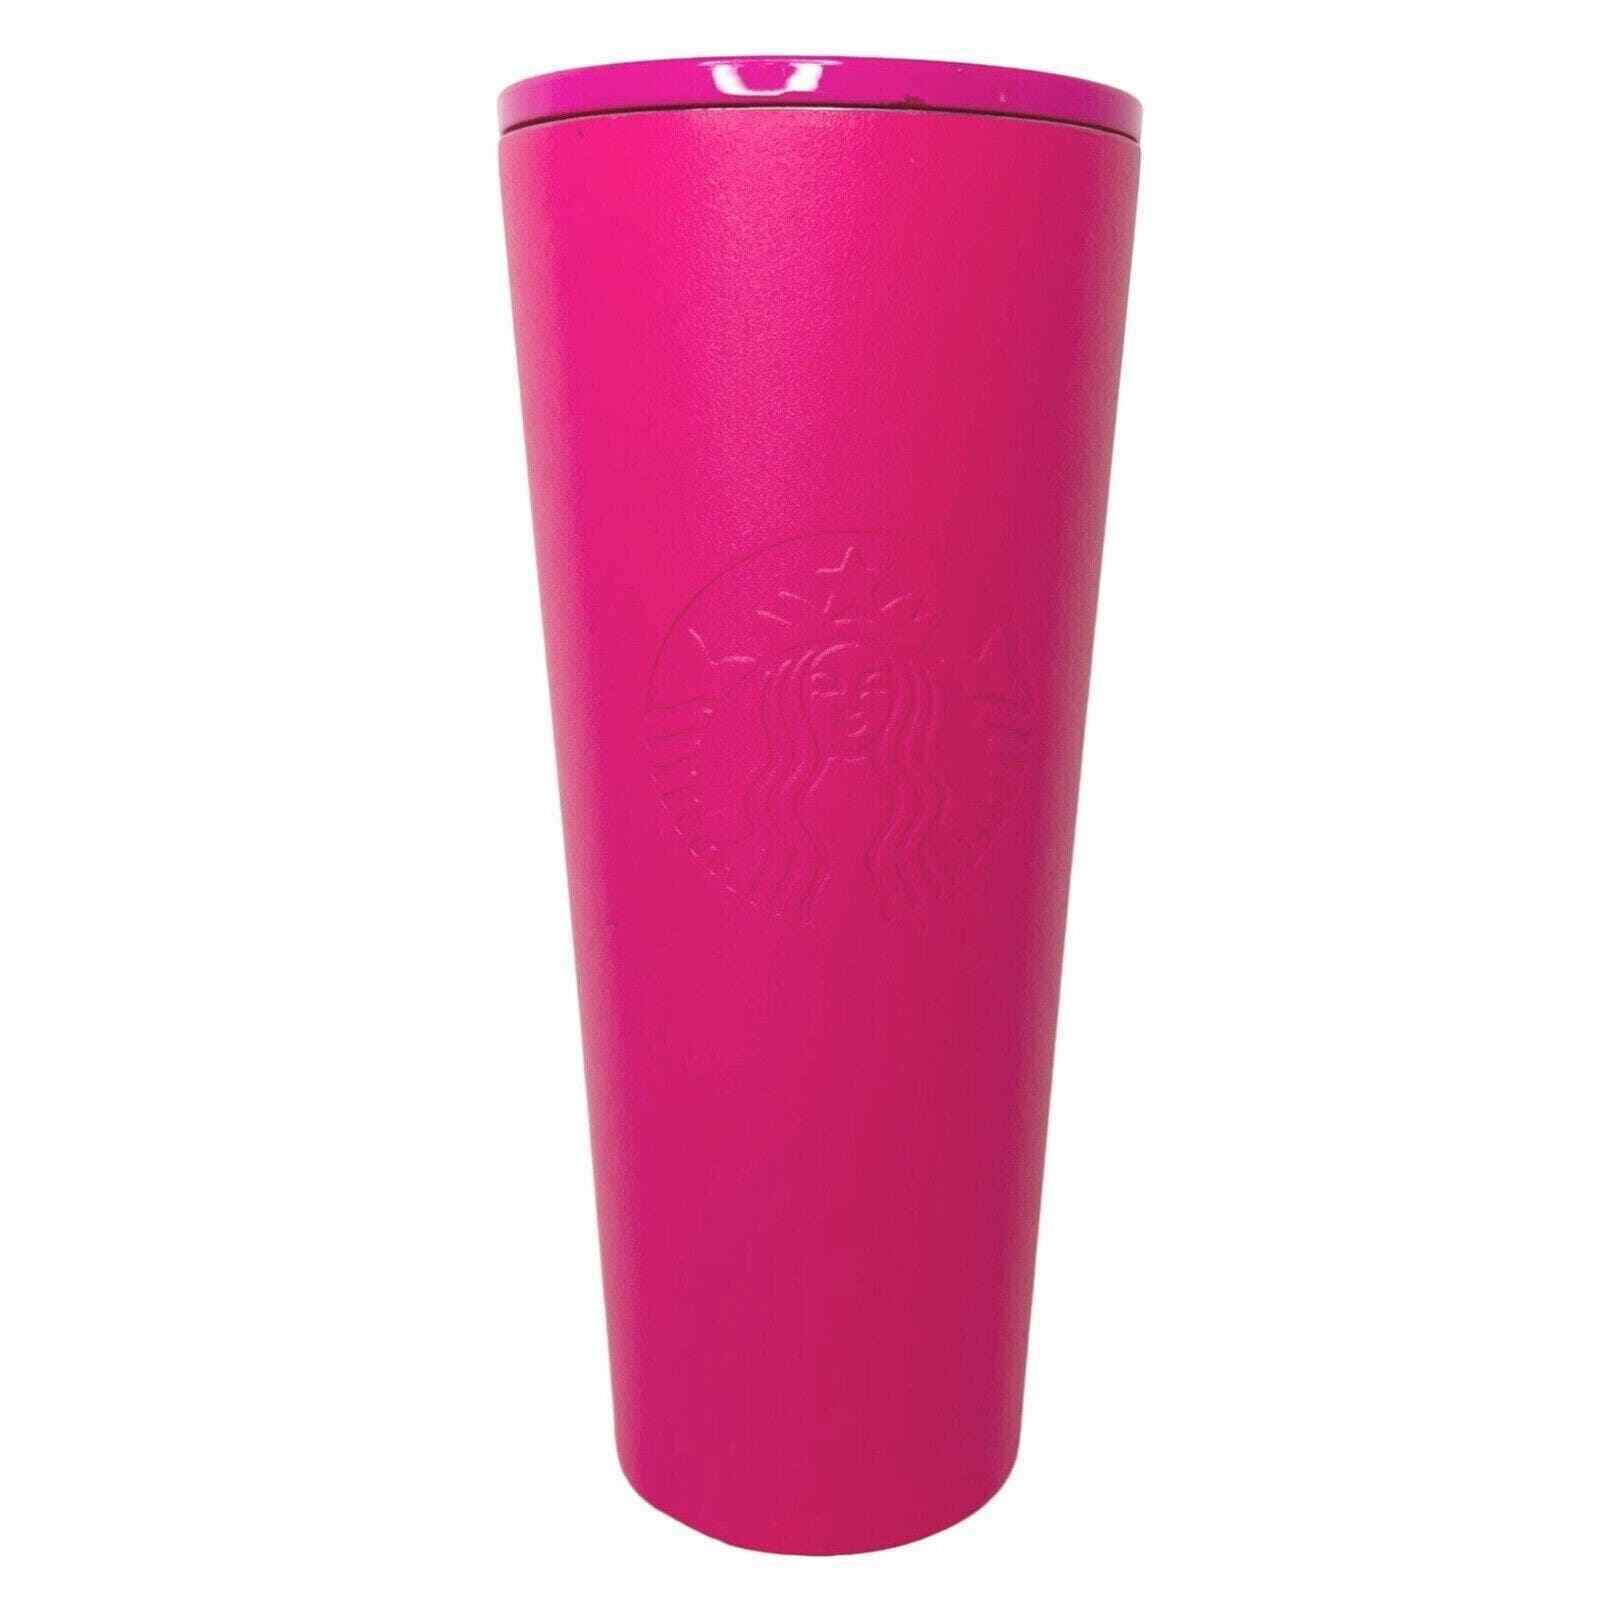 Starbucks Summer 2018 Hot Pink Fuchsia Stainless Steel Cold Cup Tumbler 24oz